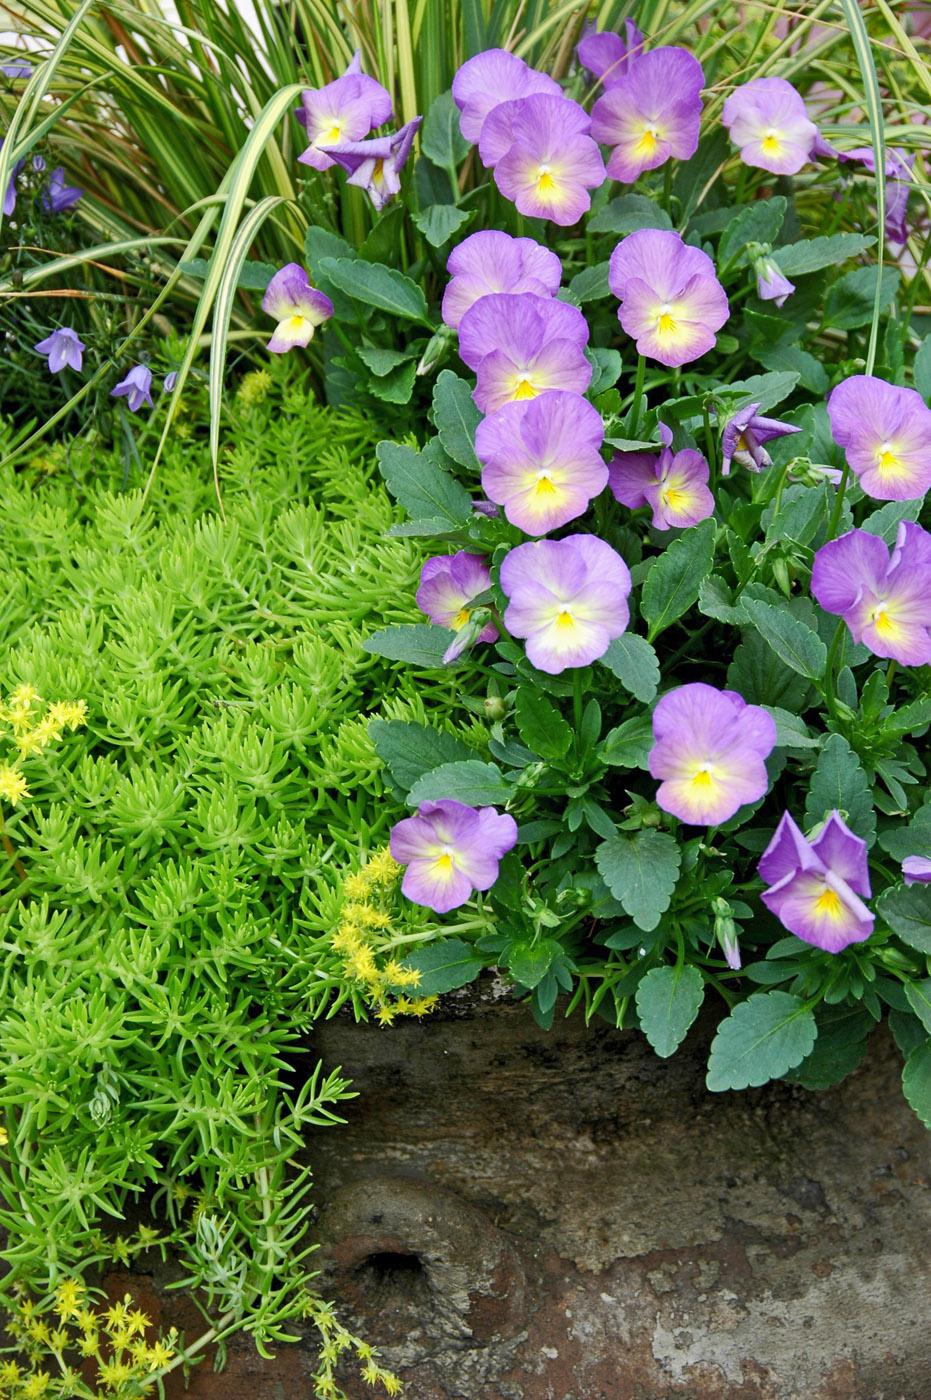 Four species of plants lend their special colors and textures to this old piece of pottery. An Etain viola is the focal point, and its lavender edges contrast with the golden blades of Ogon dwarf sweet flag. Lemon Coral sedum gently tumbles over the rim of the container, and the tiny Thumbell bellflowers add visual interest and finish the fine piece of art.